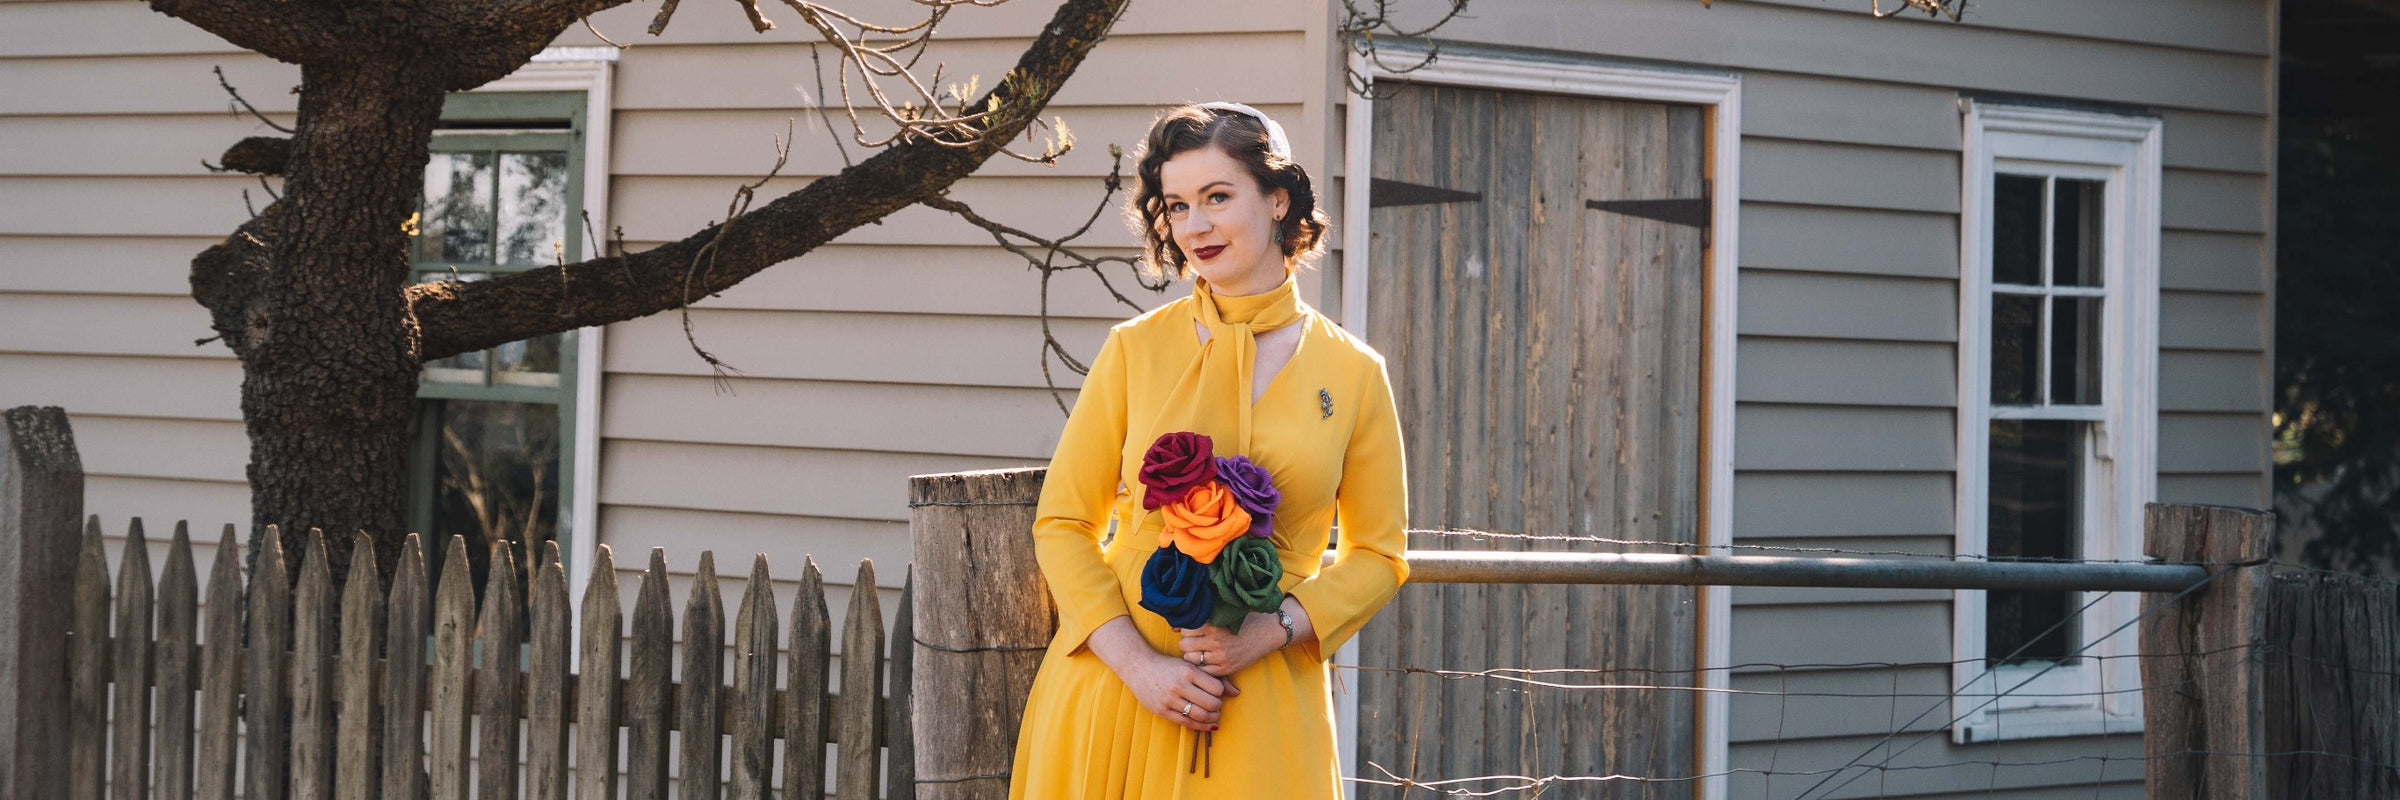 Miss Poppins wearing a bright yellow swing dress, holding a bright rainbow bouquet of paper roses against a rustic timber farms shed and gate